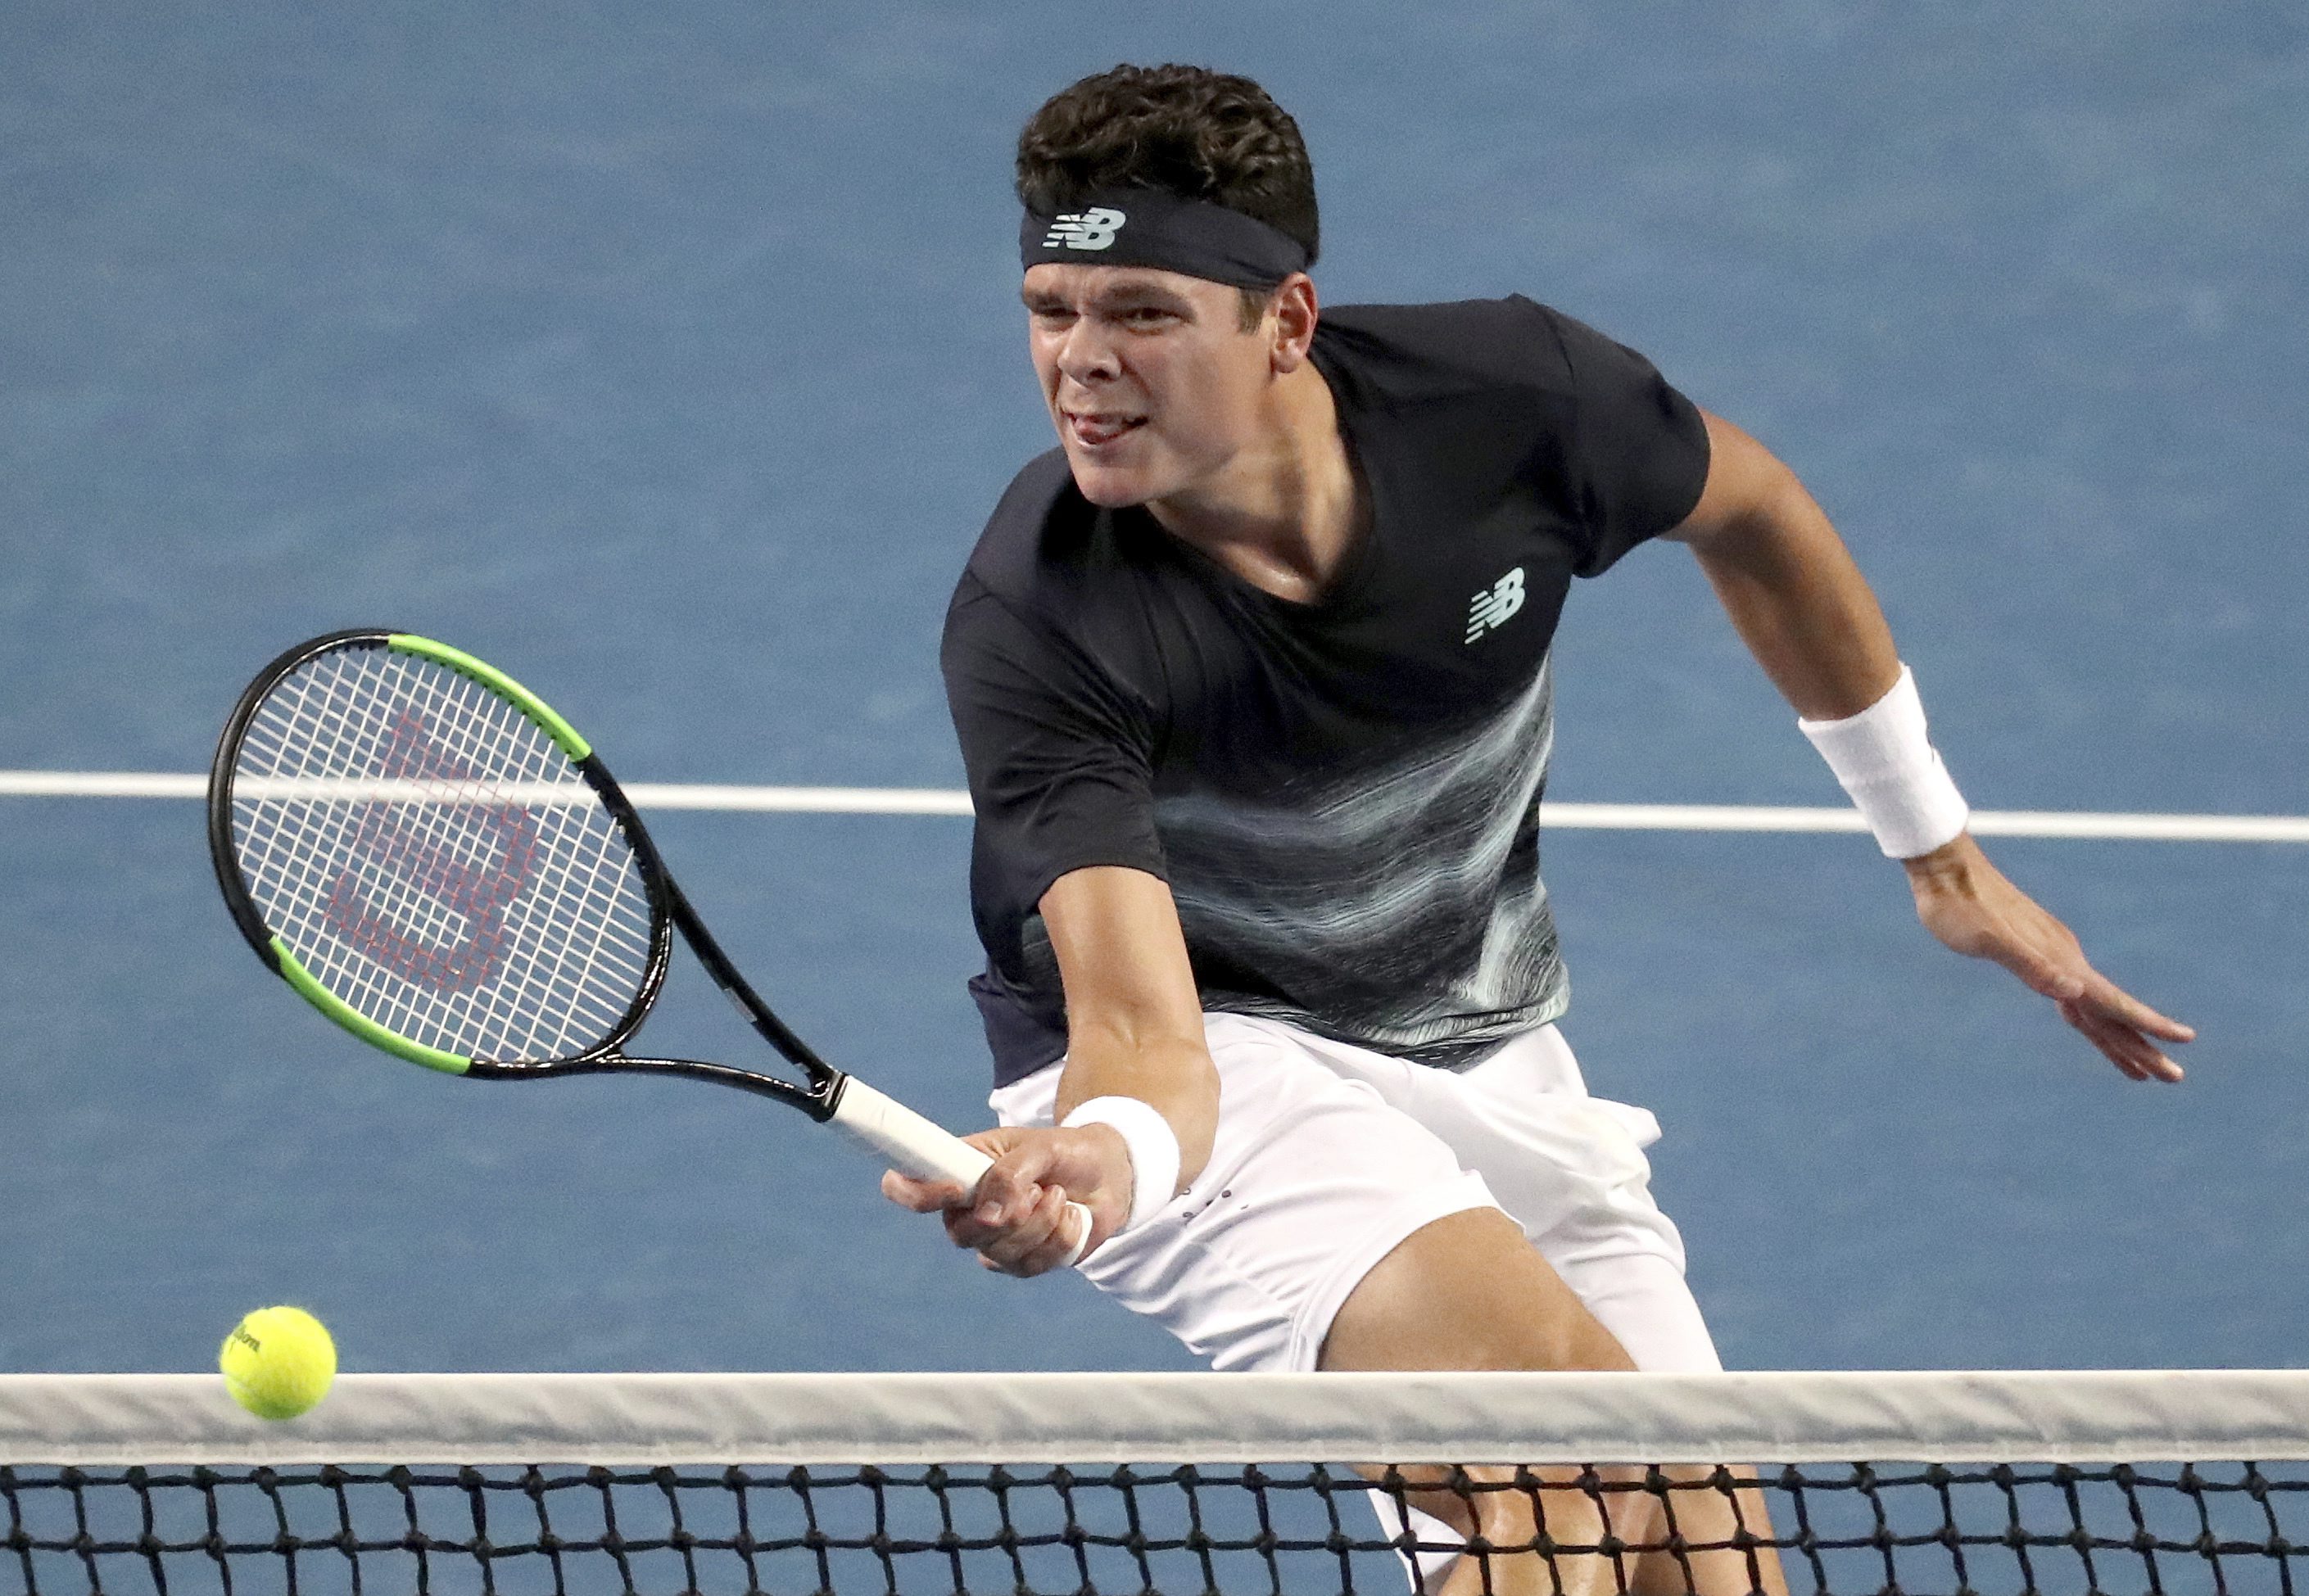 Canada's Milos Raonic hits a forehand to Spain's Roberto Bautista Agut during their fourth round match at the Australian Open tennis championships in Melbourne, Australia, Monday, Jan. 23, 2017. (AP Photo/Aaron Favila)